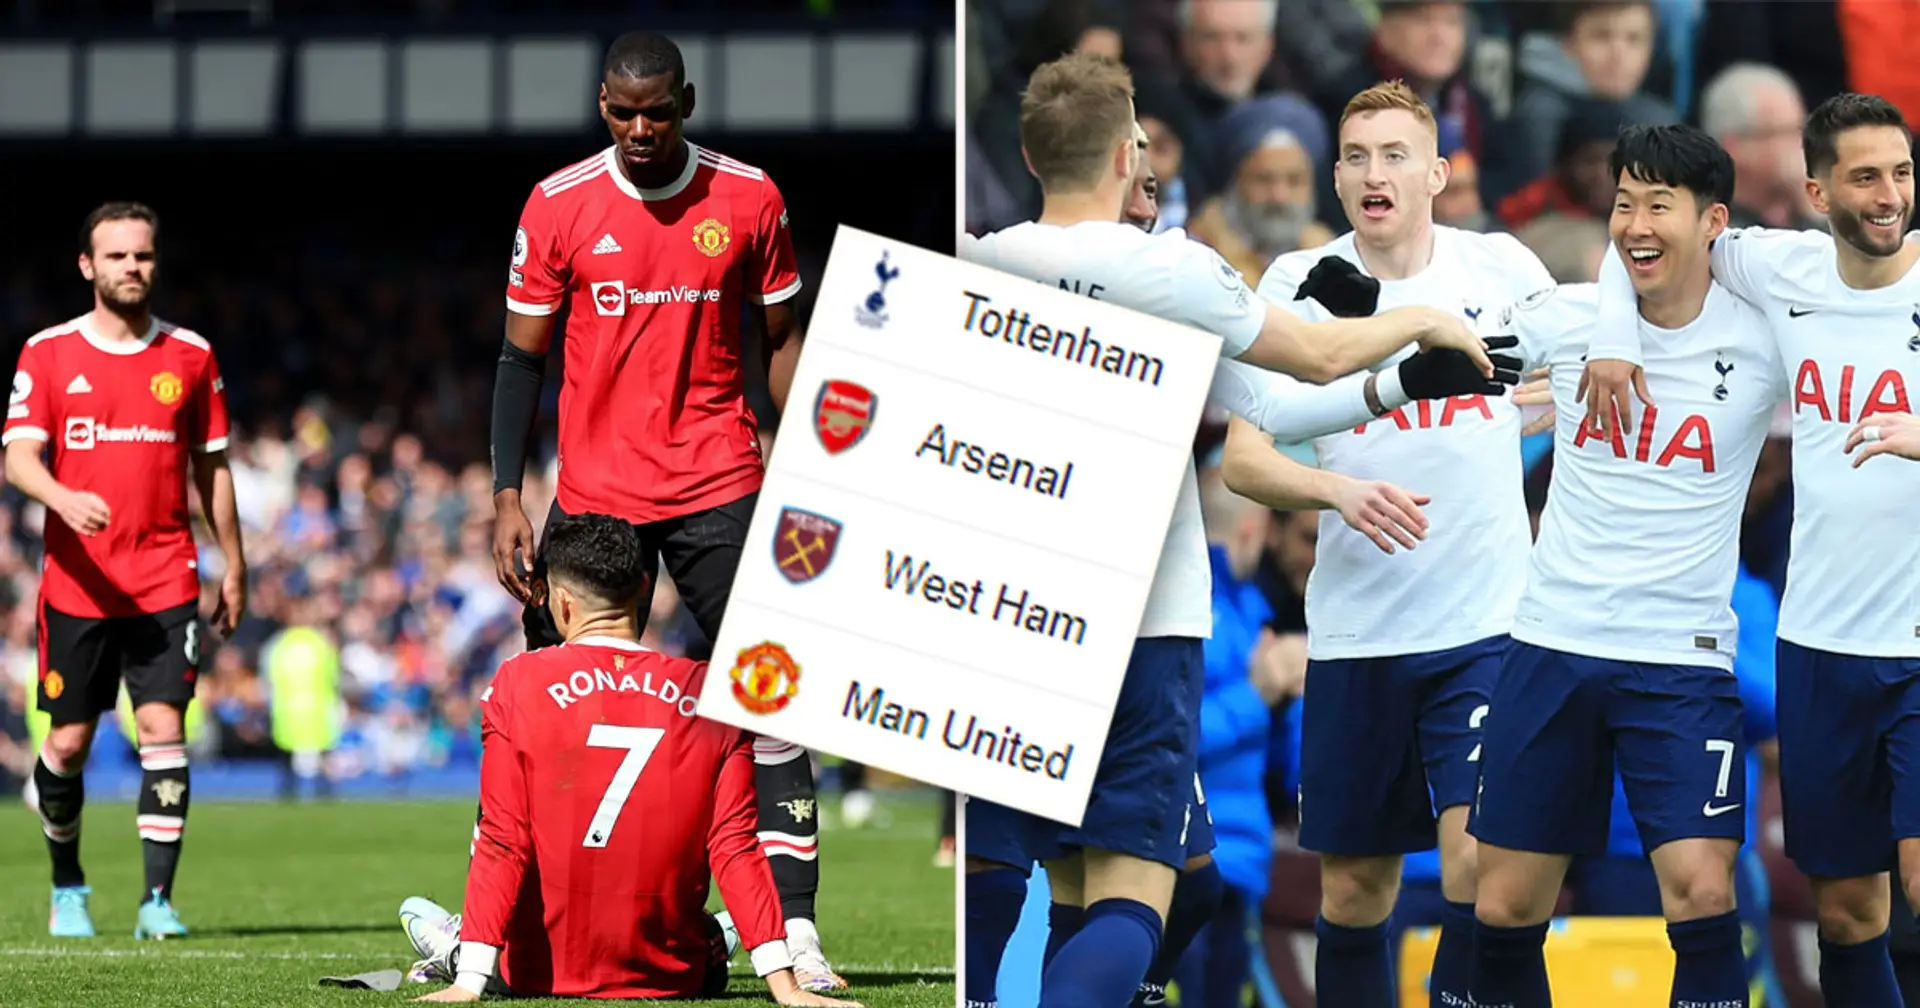 Arsenal lose, Spurs win big as United stay in 7th: updated Premier League table after latest results